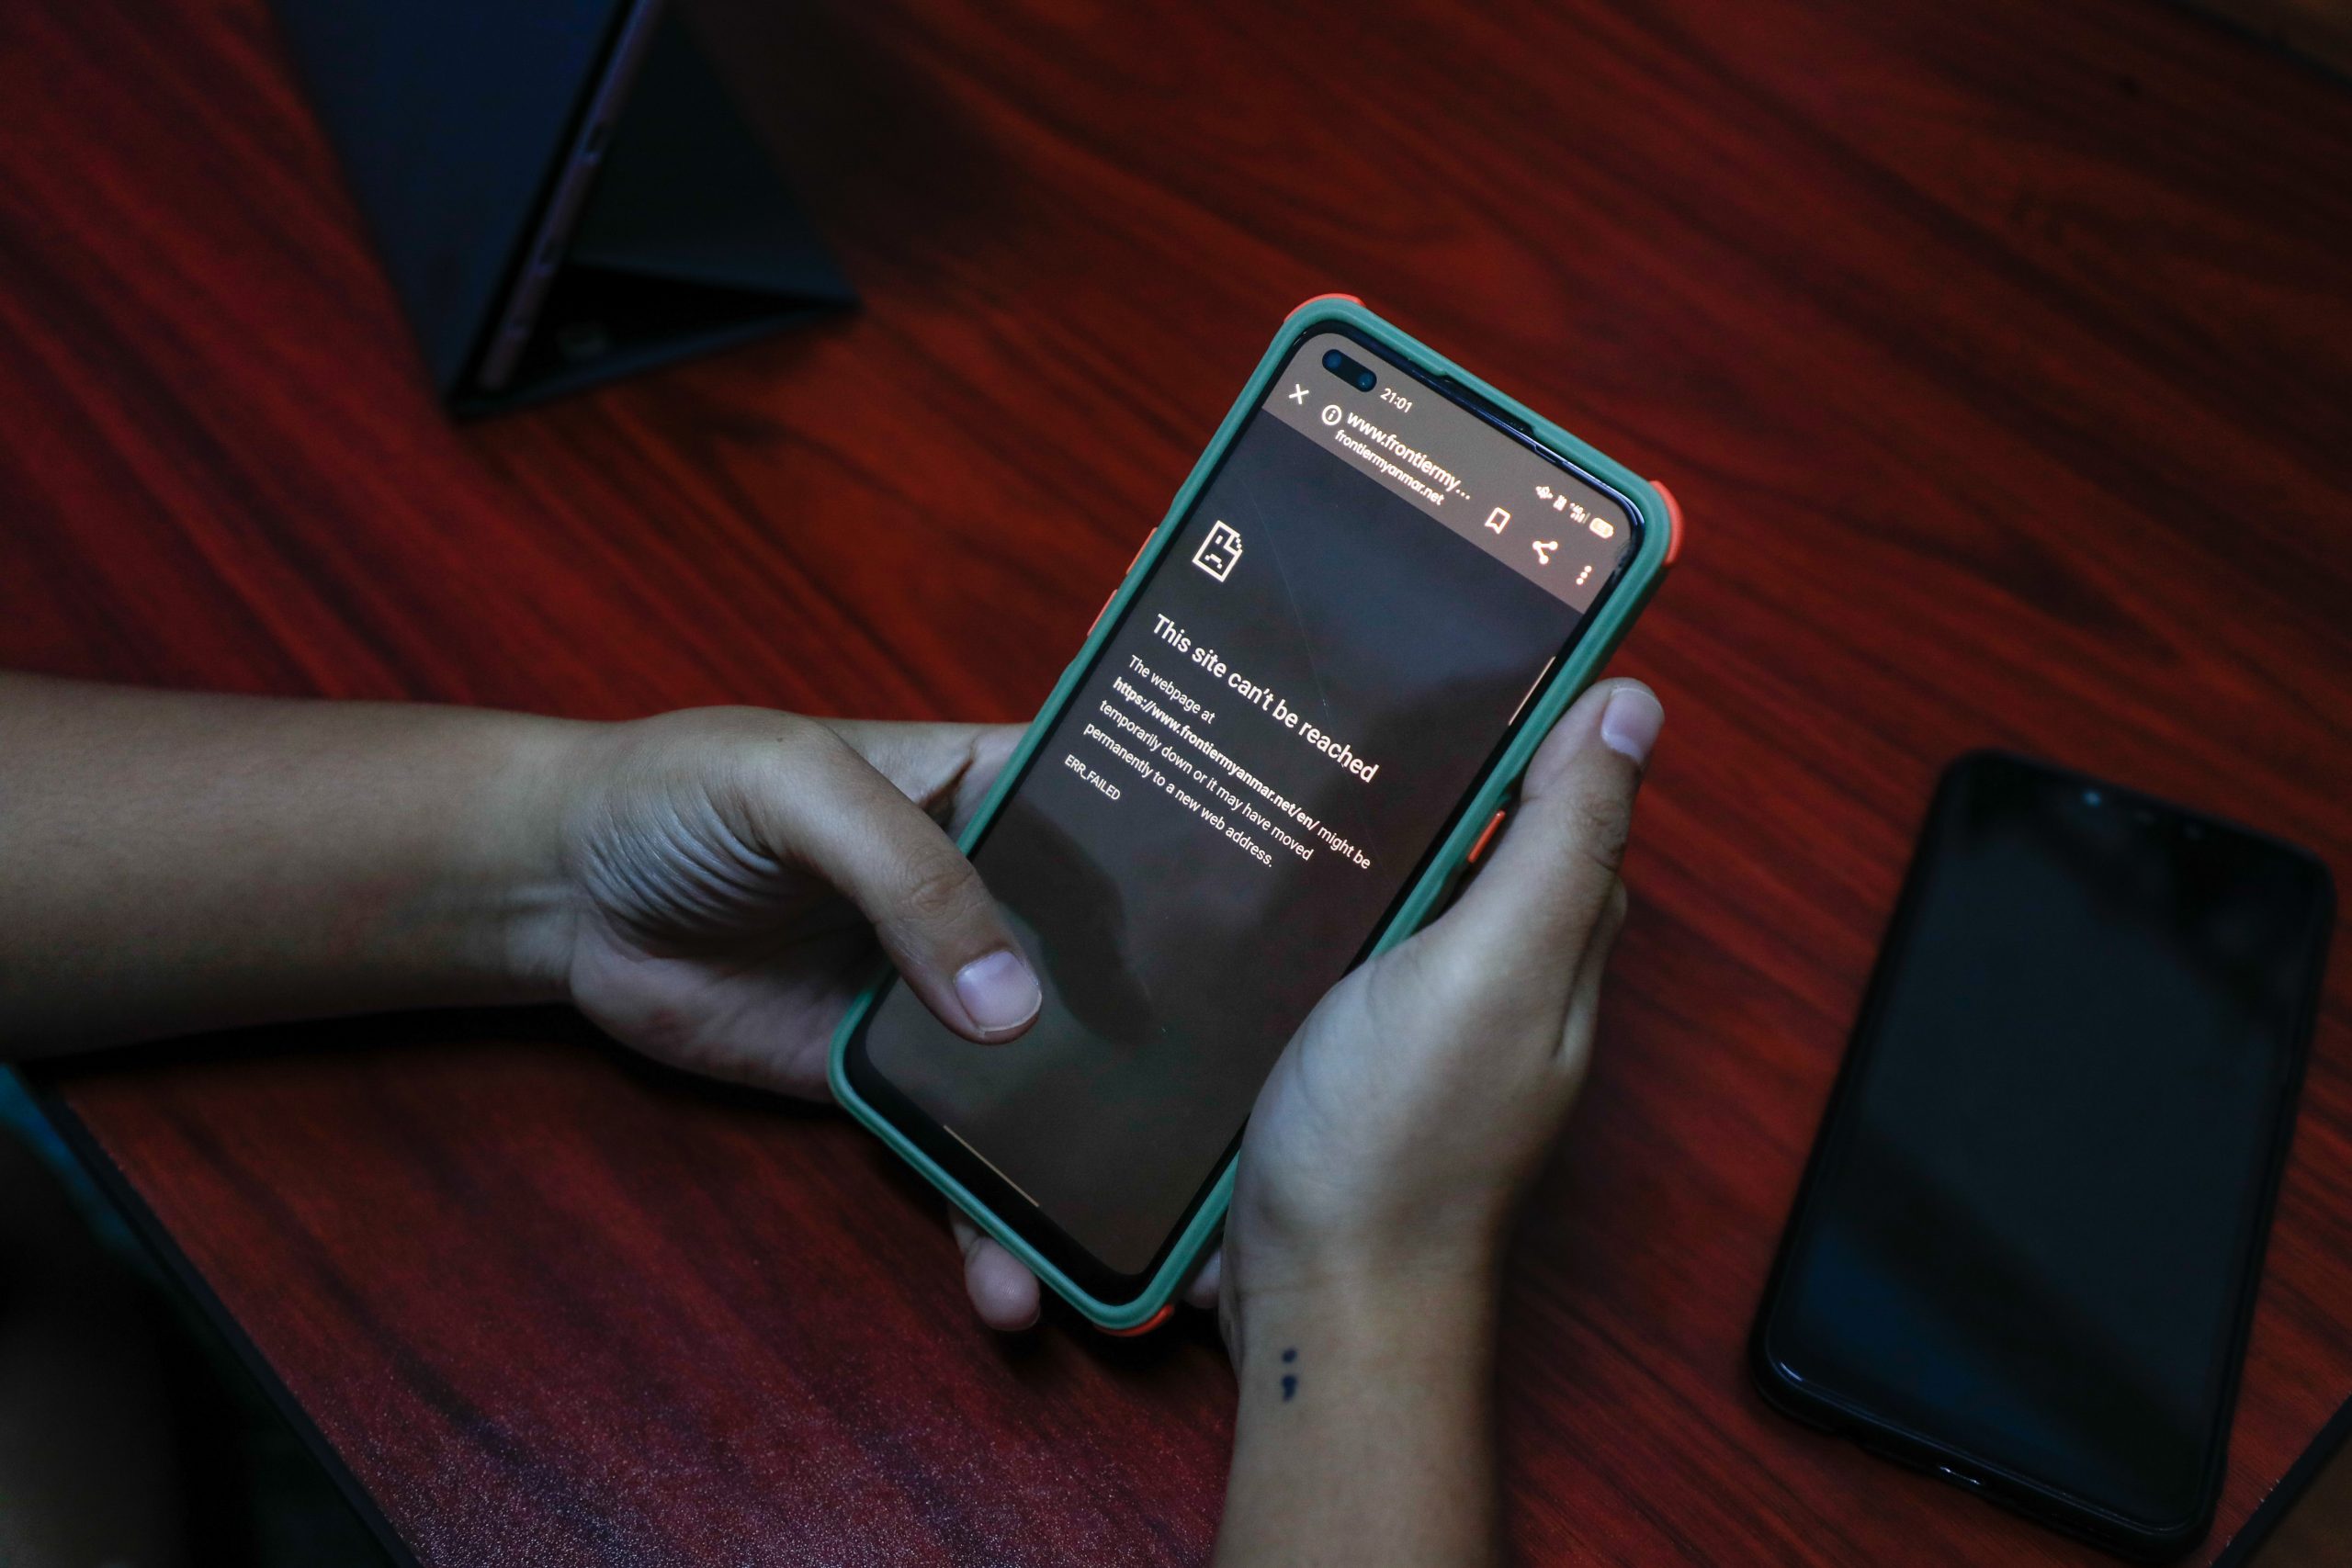 Someone holding a phone with the screen showing a browser not connecting to Frontier's website on June 29, 2021 (Frontier).